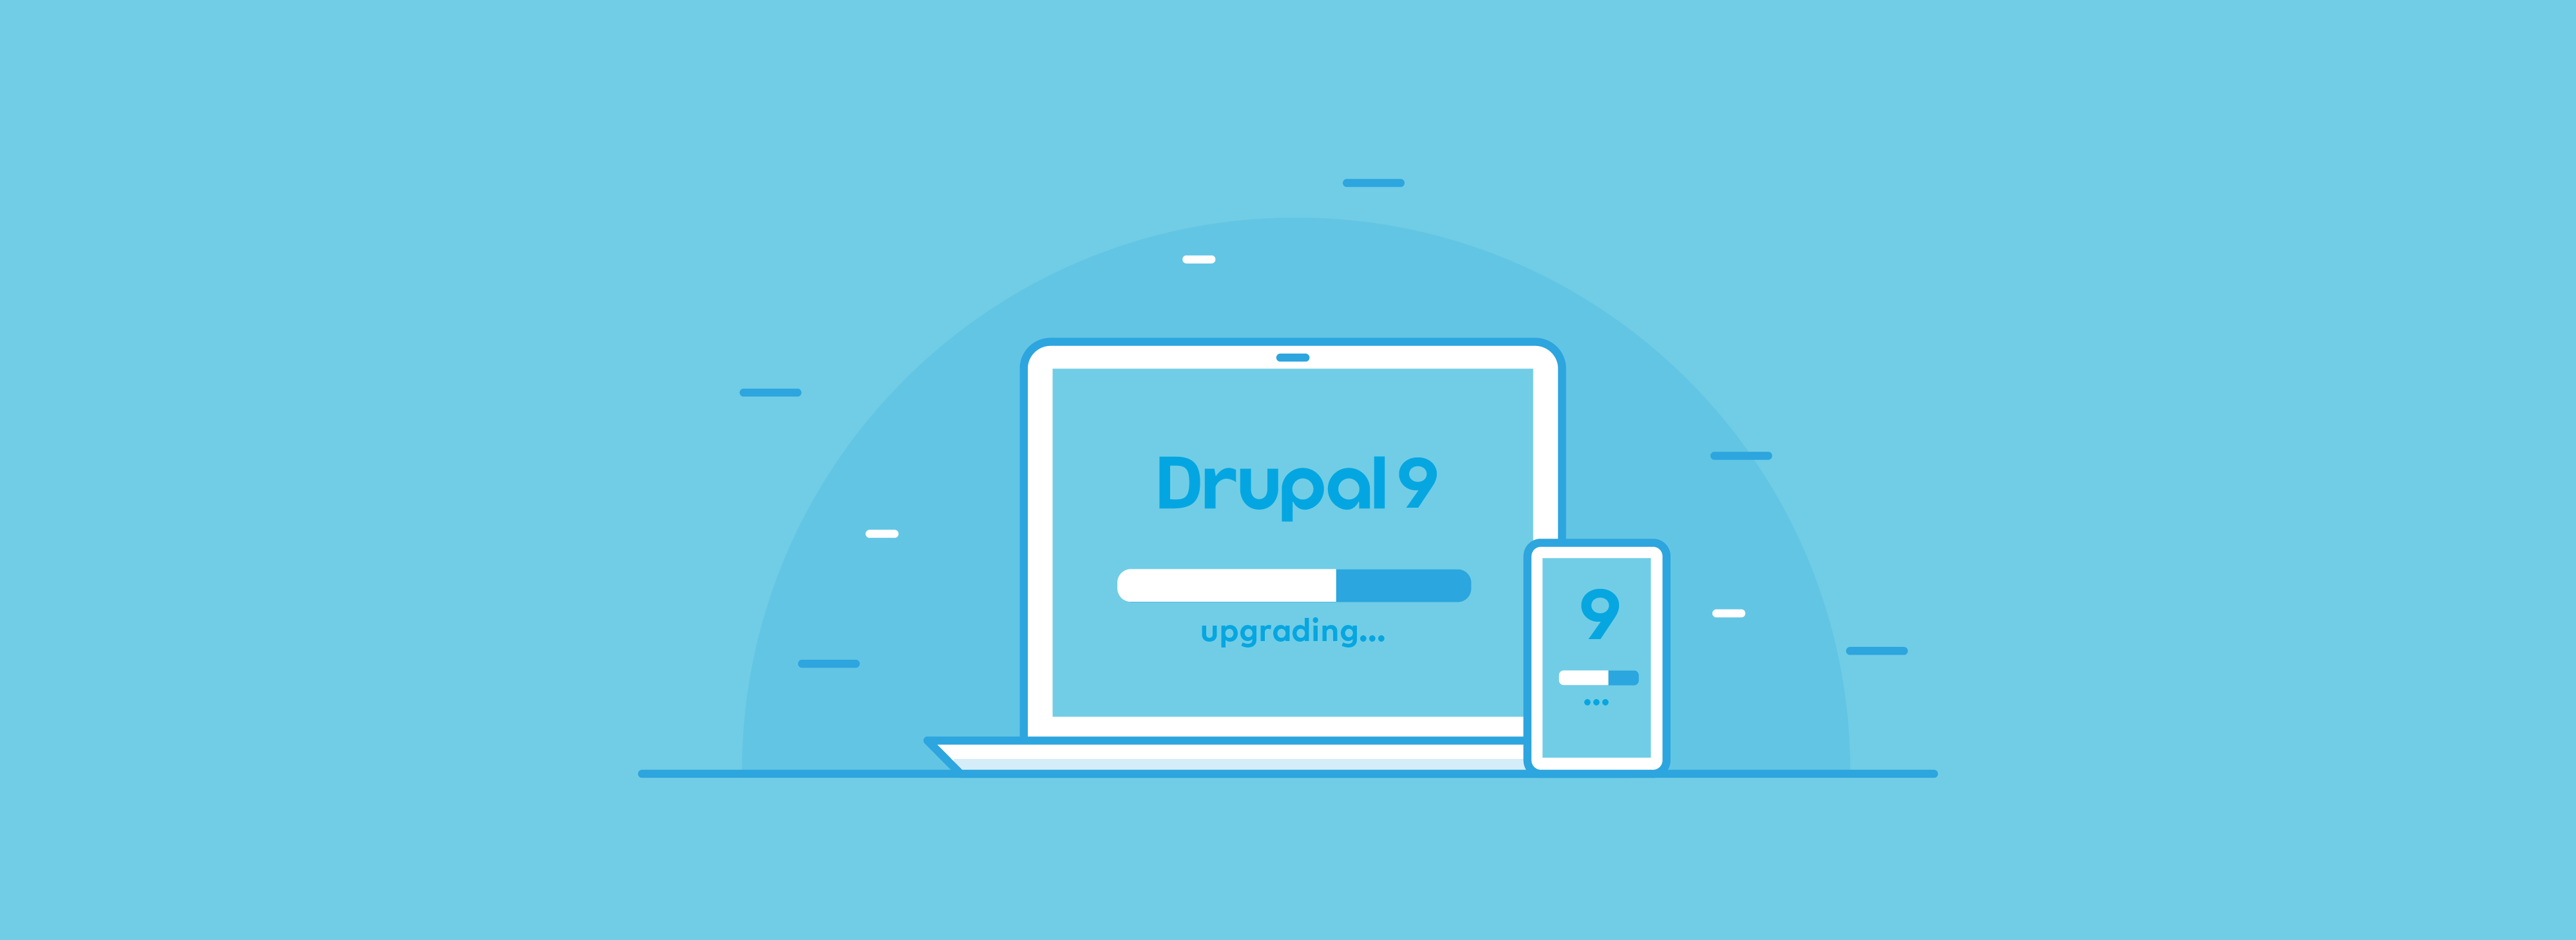 drupal 9 attach library